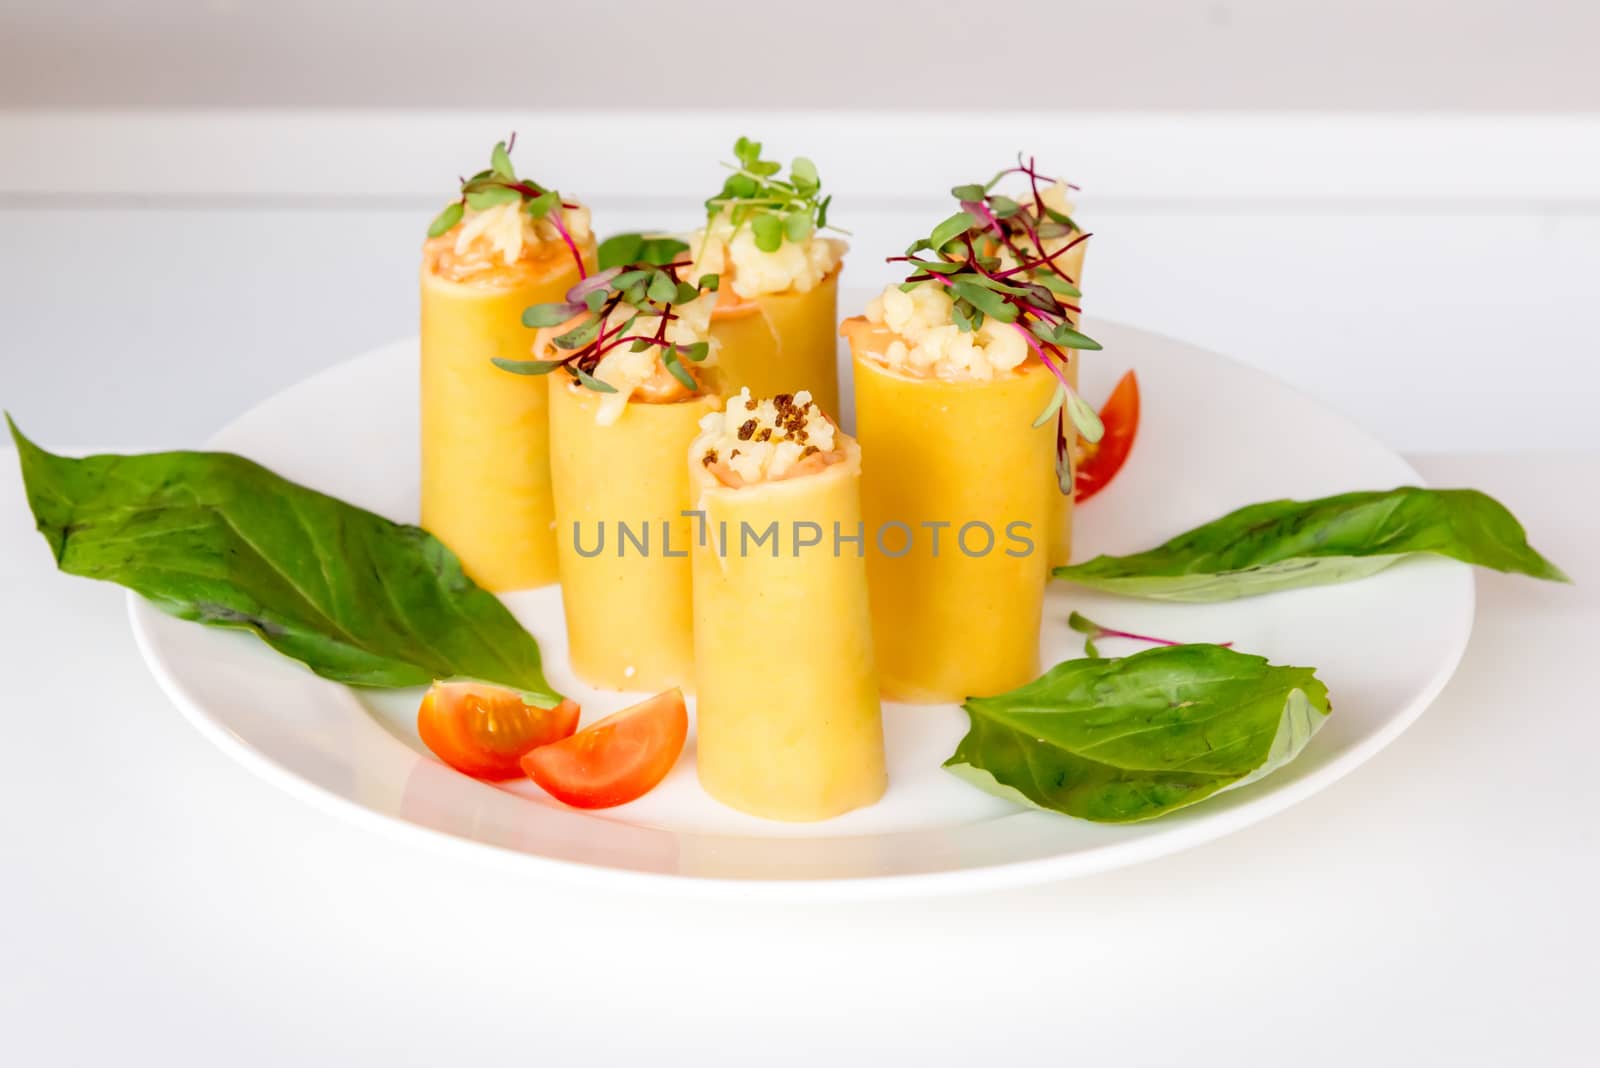 appetizer - cheese rolls with meat and vegetables by vlaru